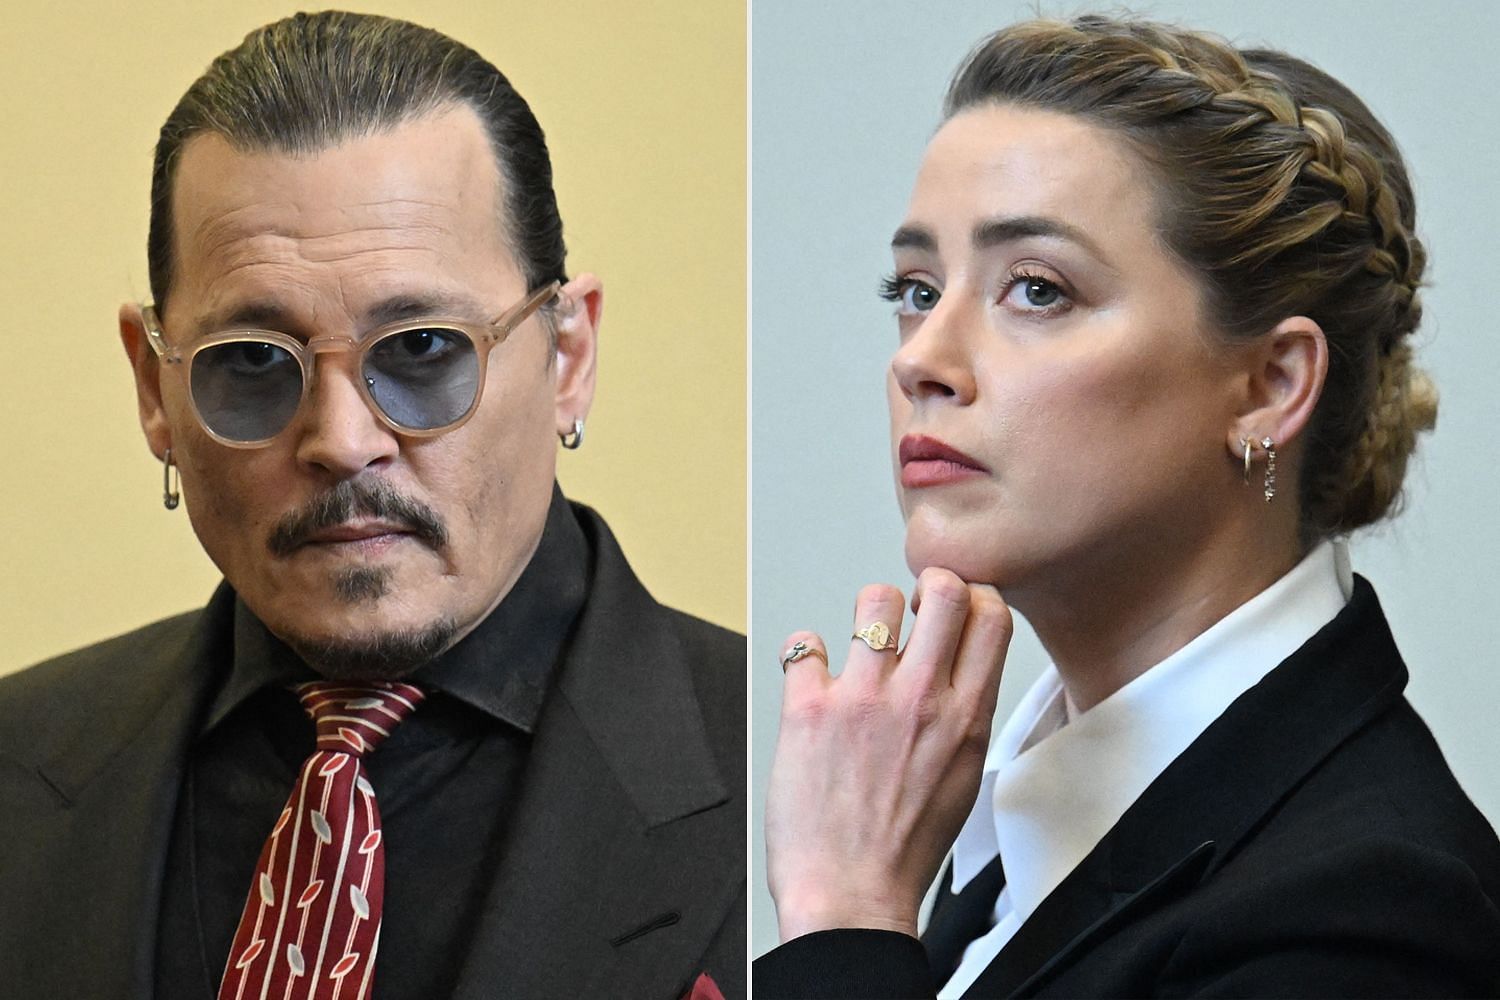 Johnny Depp and Amber Heard (Image via JIM WATSON / Getty Images)